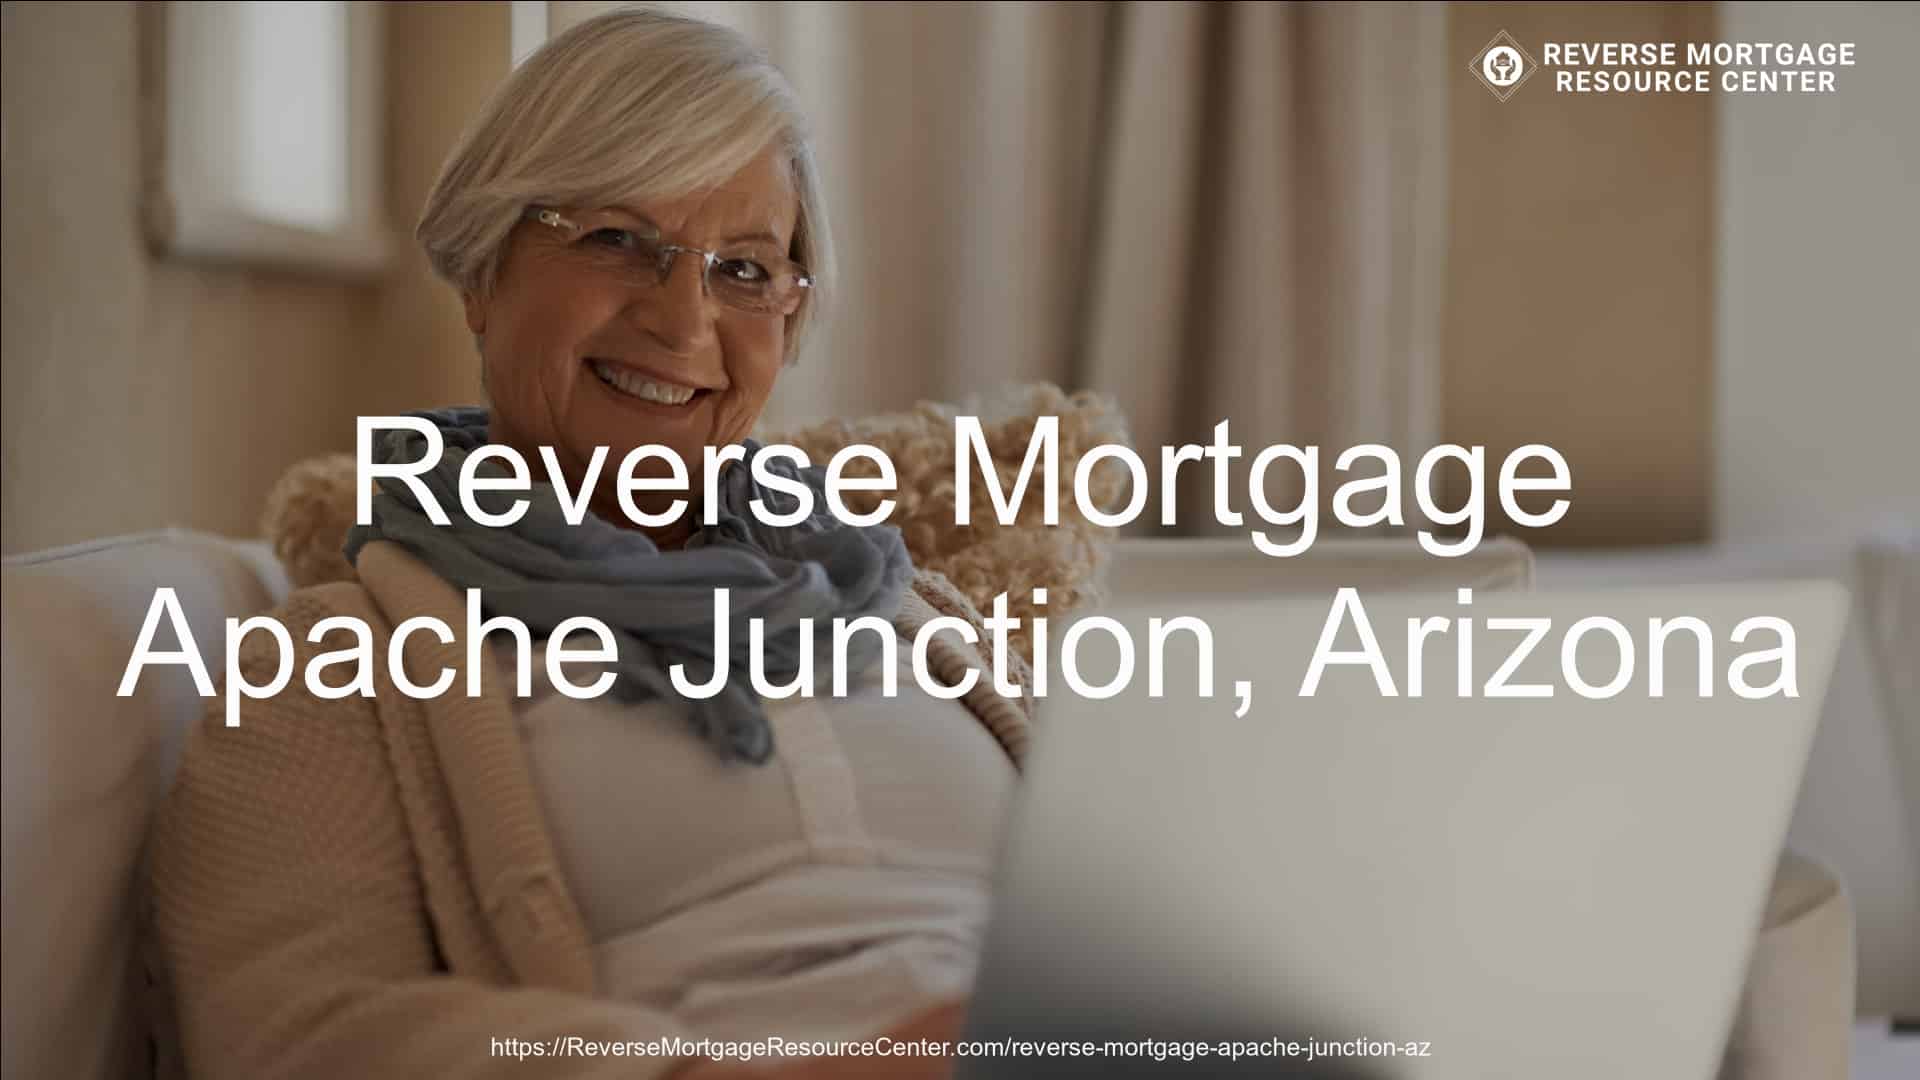 Reverse Mortgage Loans in Apache Junction Arizona